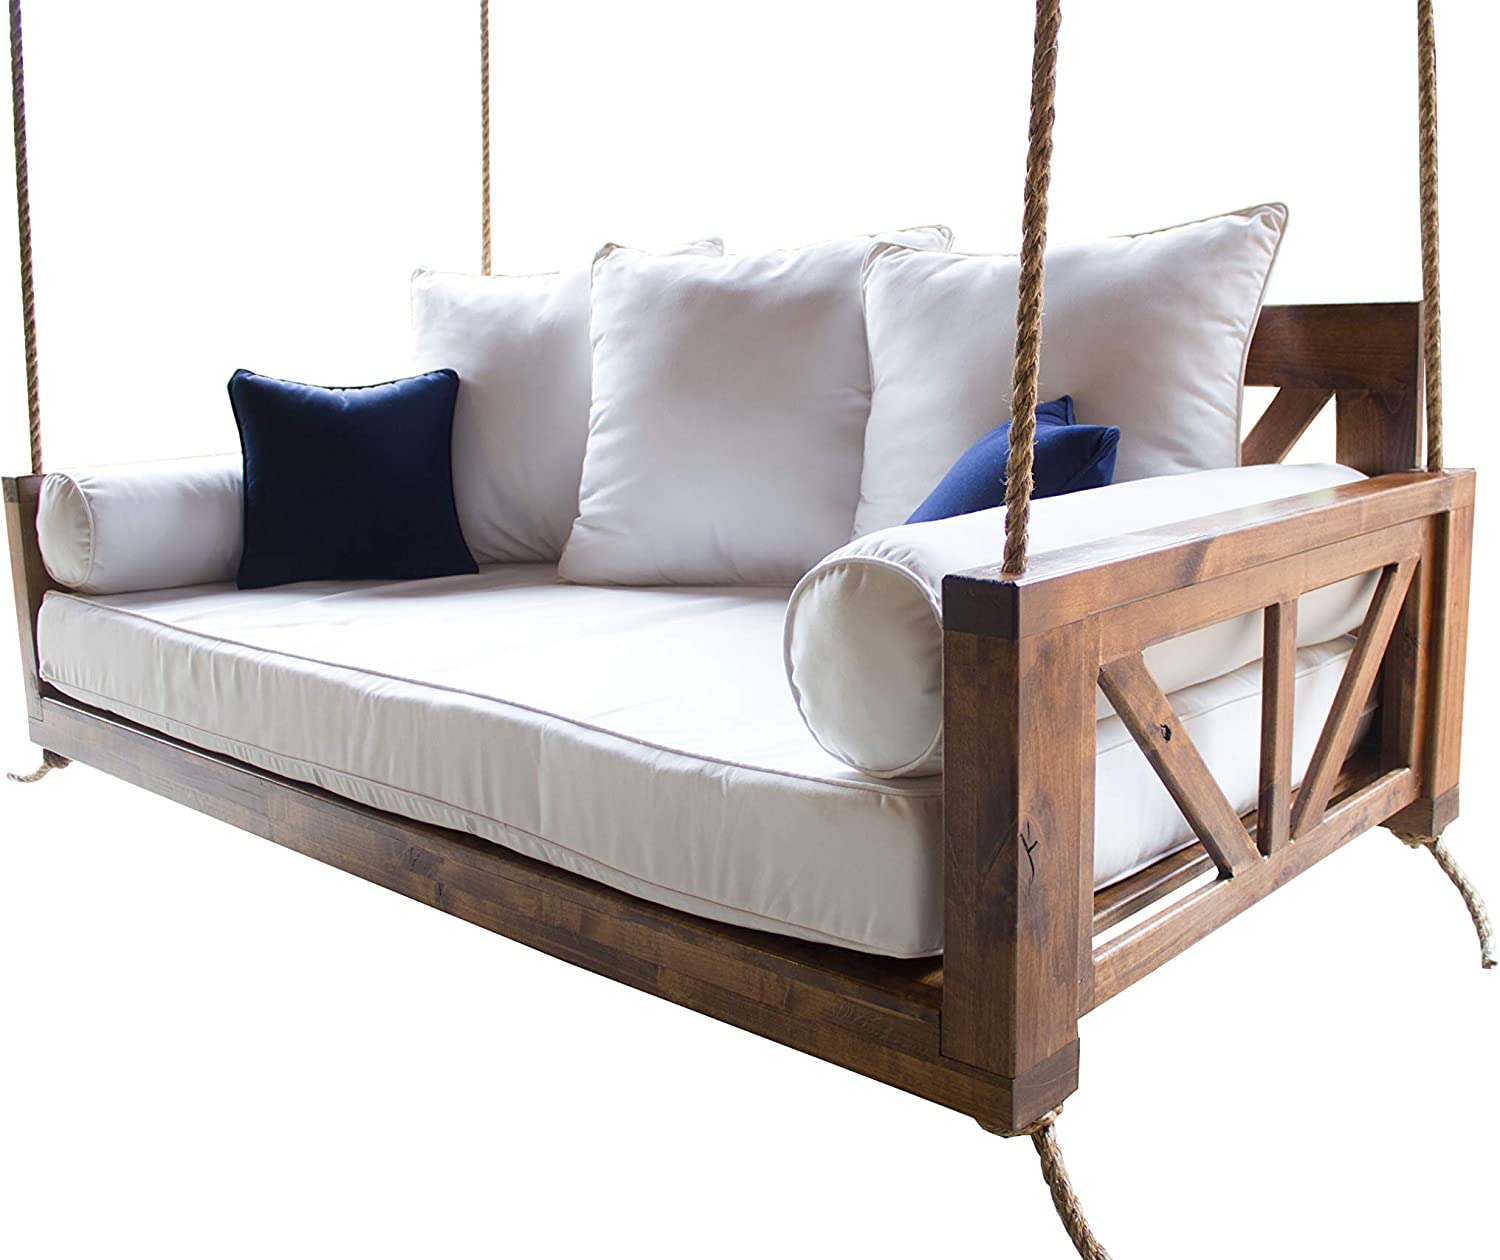 Will Wooden Porch Swing Ever Die?